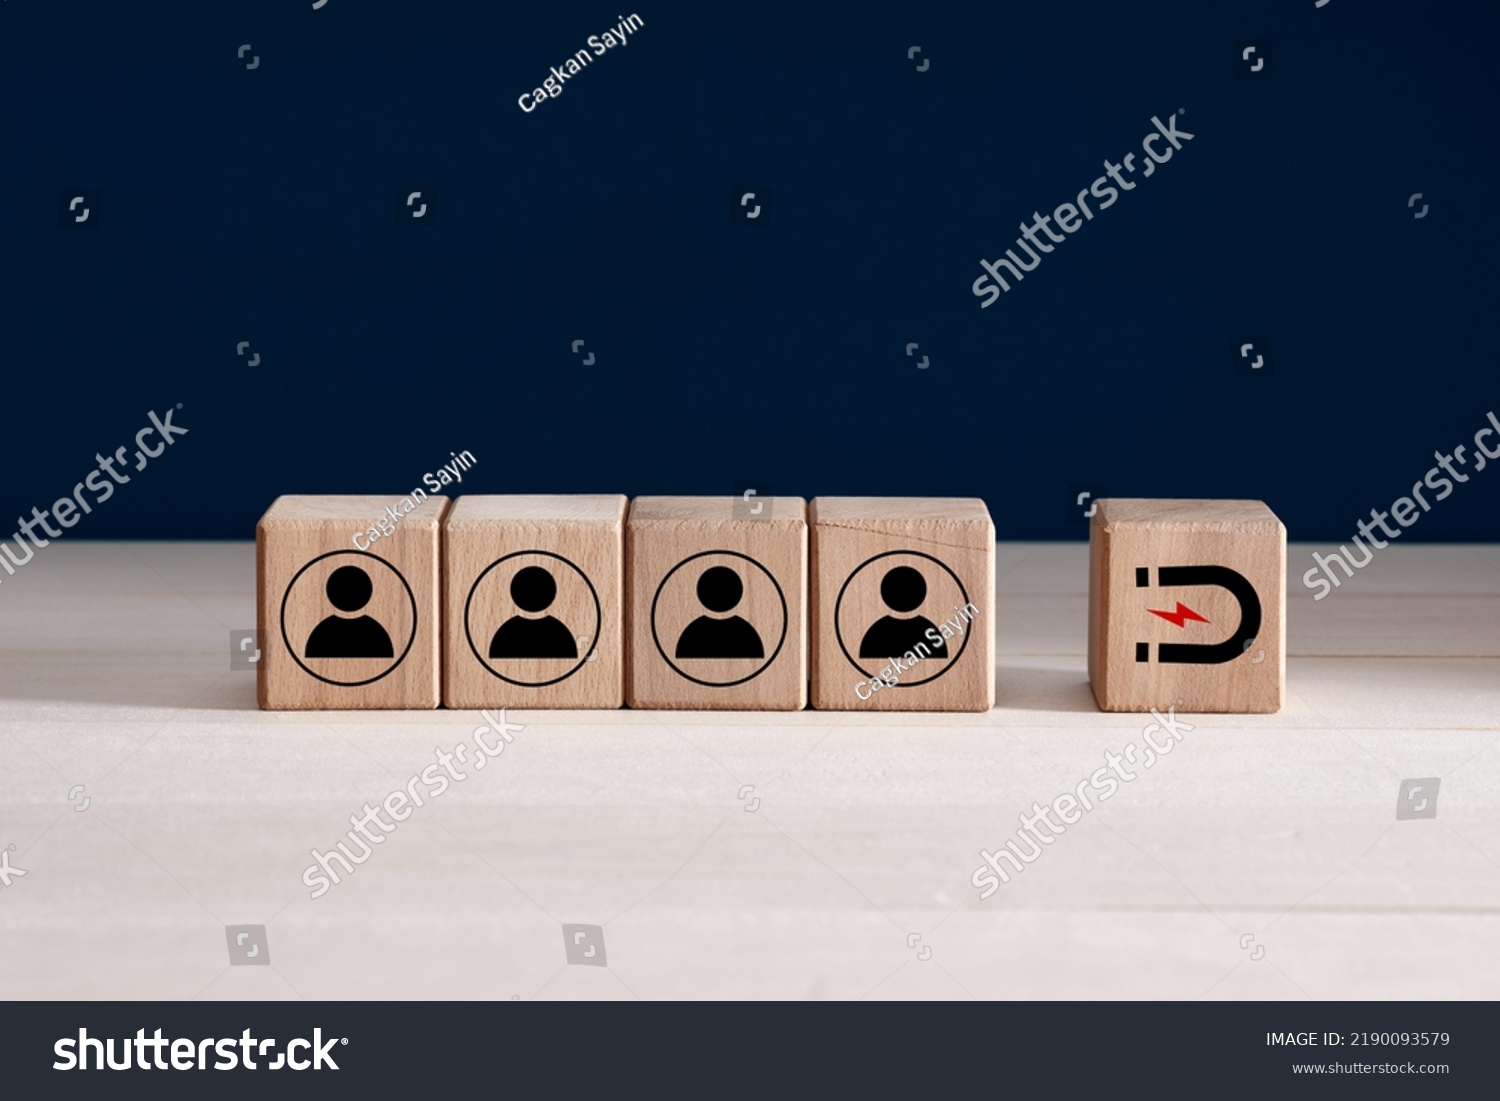 Inbound marketing strategy, customer retention, digital marketing and attracting potential customers in business concept. Wooden cubes with magnet icon attracts the customer icons. #2190093579